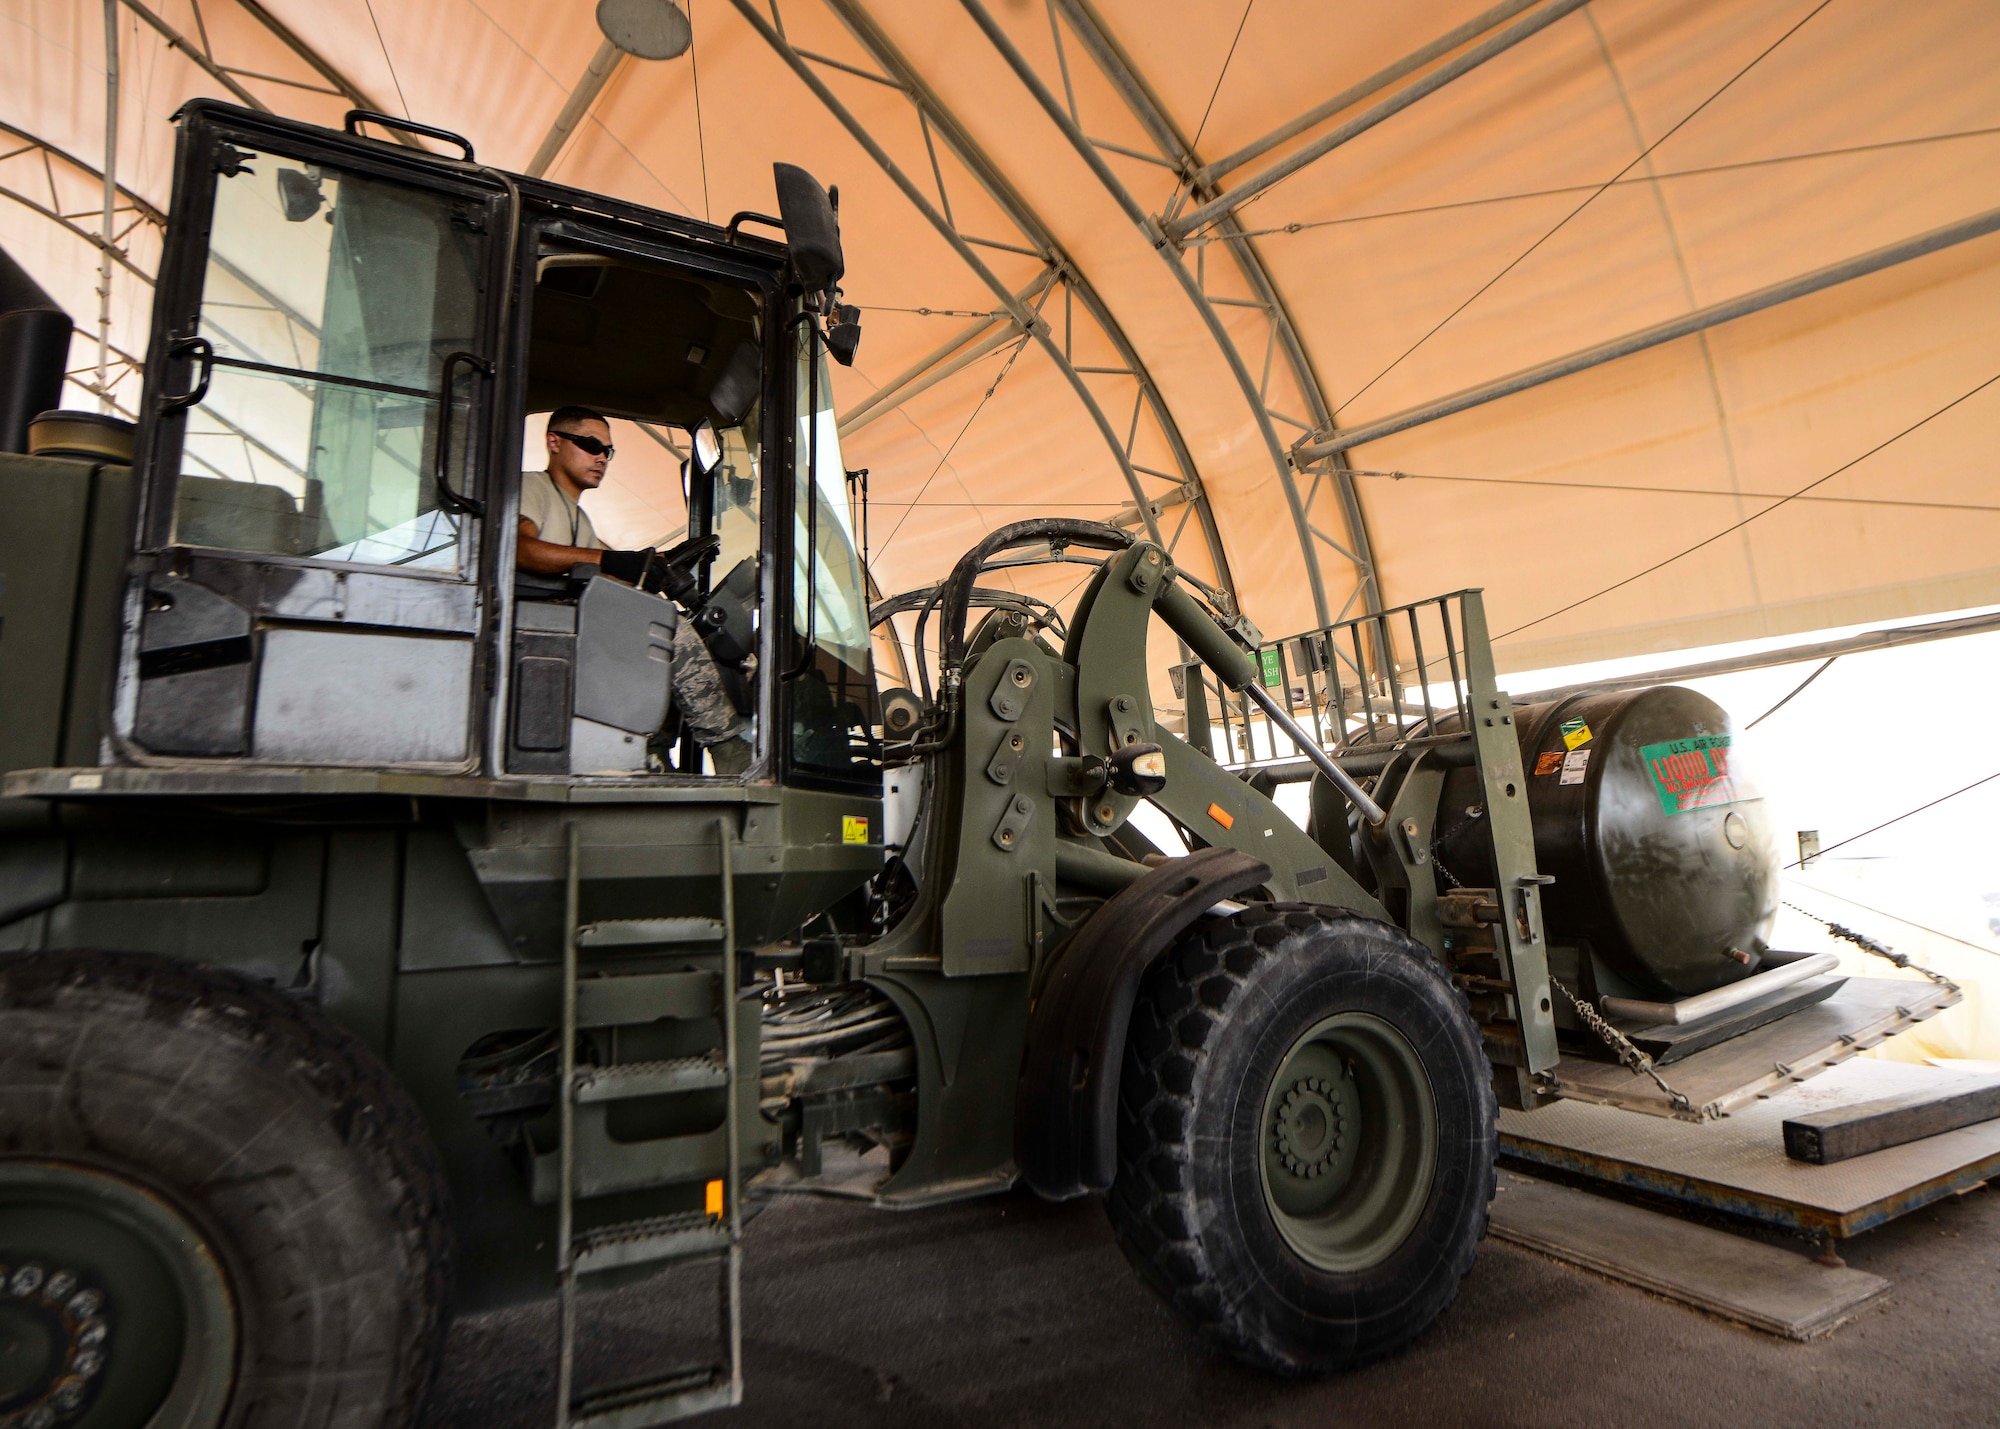 Staff Sgt. John Saninoncio, 379th Expeditionary Logistics Readiness Squadron fuels cryogenics supervisor, places a 400-gallon liquid oxygen tank on a weighing scale using a forklift in preparation of an aircraft shipment Aug. 5, 2016, at Al Udeid Air Base, Qatar. The 379th ELRS maintains three large storage tanks that contain liquid oxygen and liquid nitrogen along with 51 liquid oxygen and liquid nitrogen carts that ship daily to other bases throughout the U.S. Air Forces Central Command’s area of responsibility. (U.S. Air Force photo/Senior Airman Janelle Patiño/Released)
